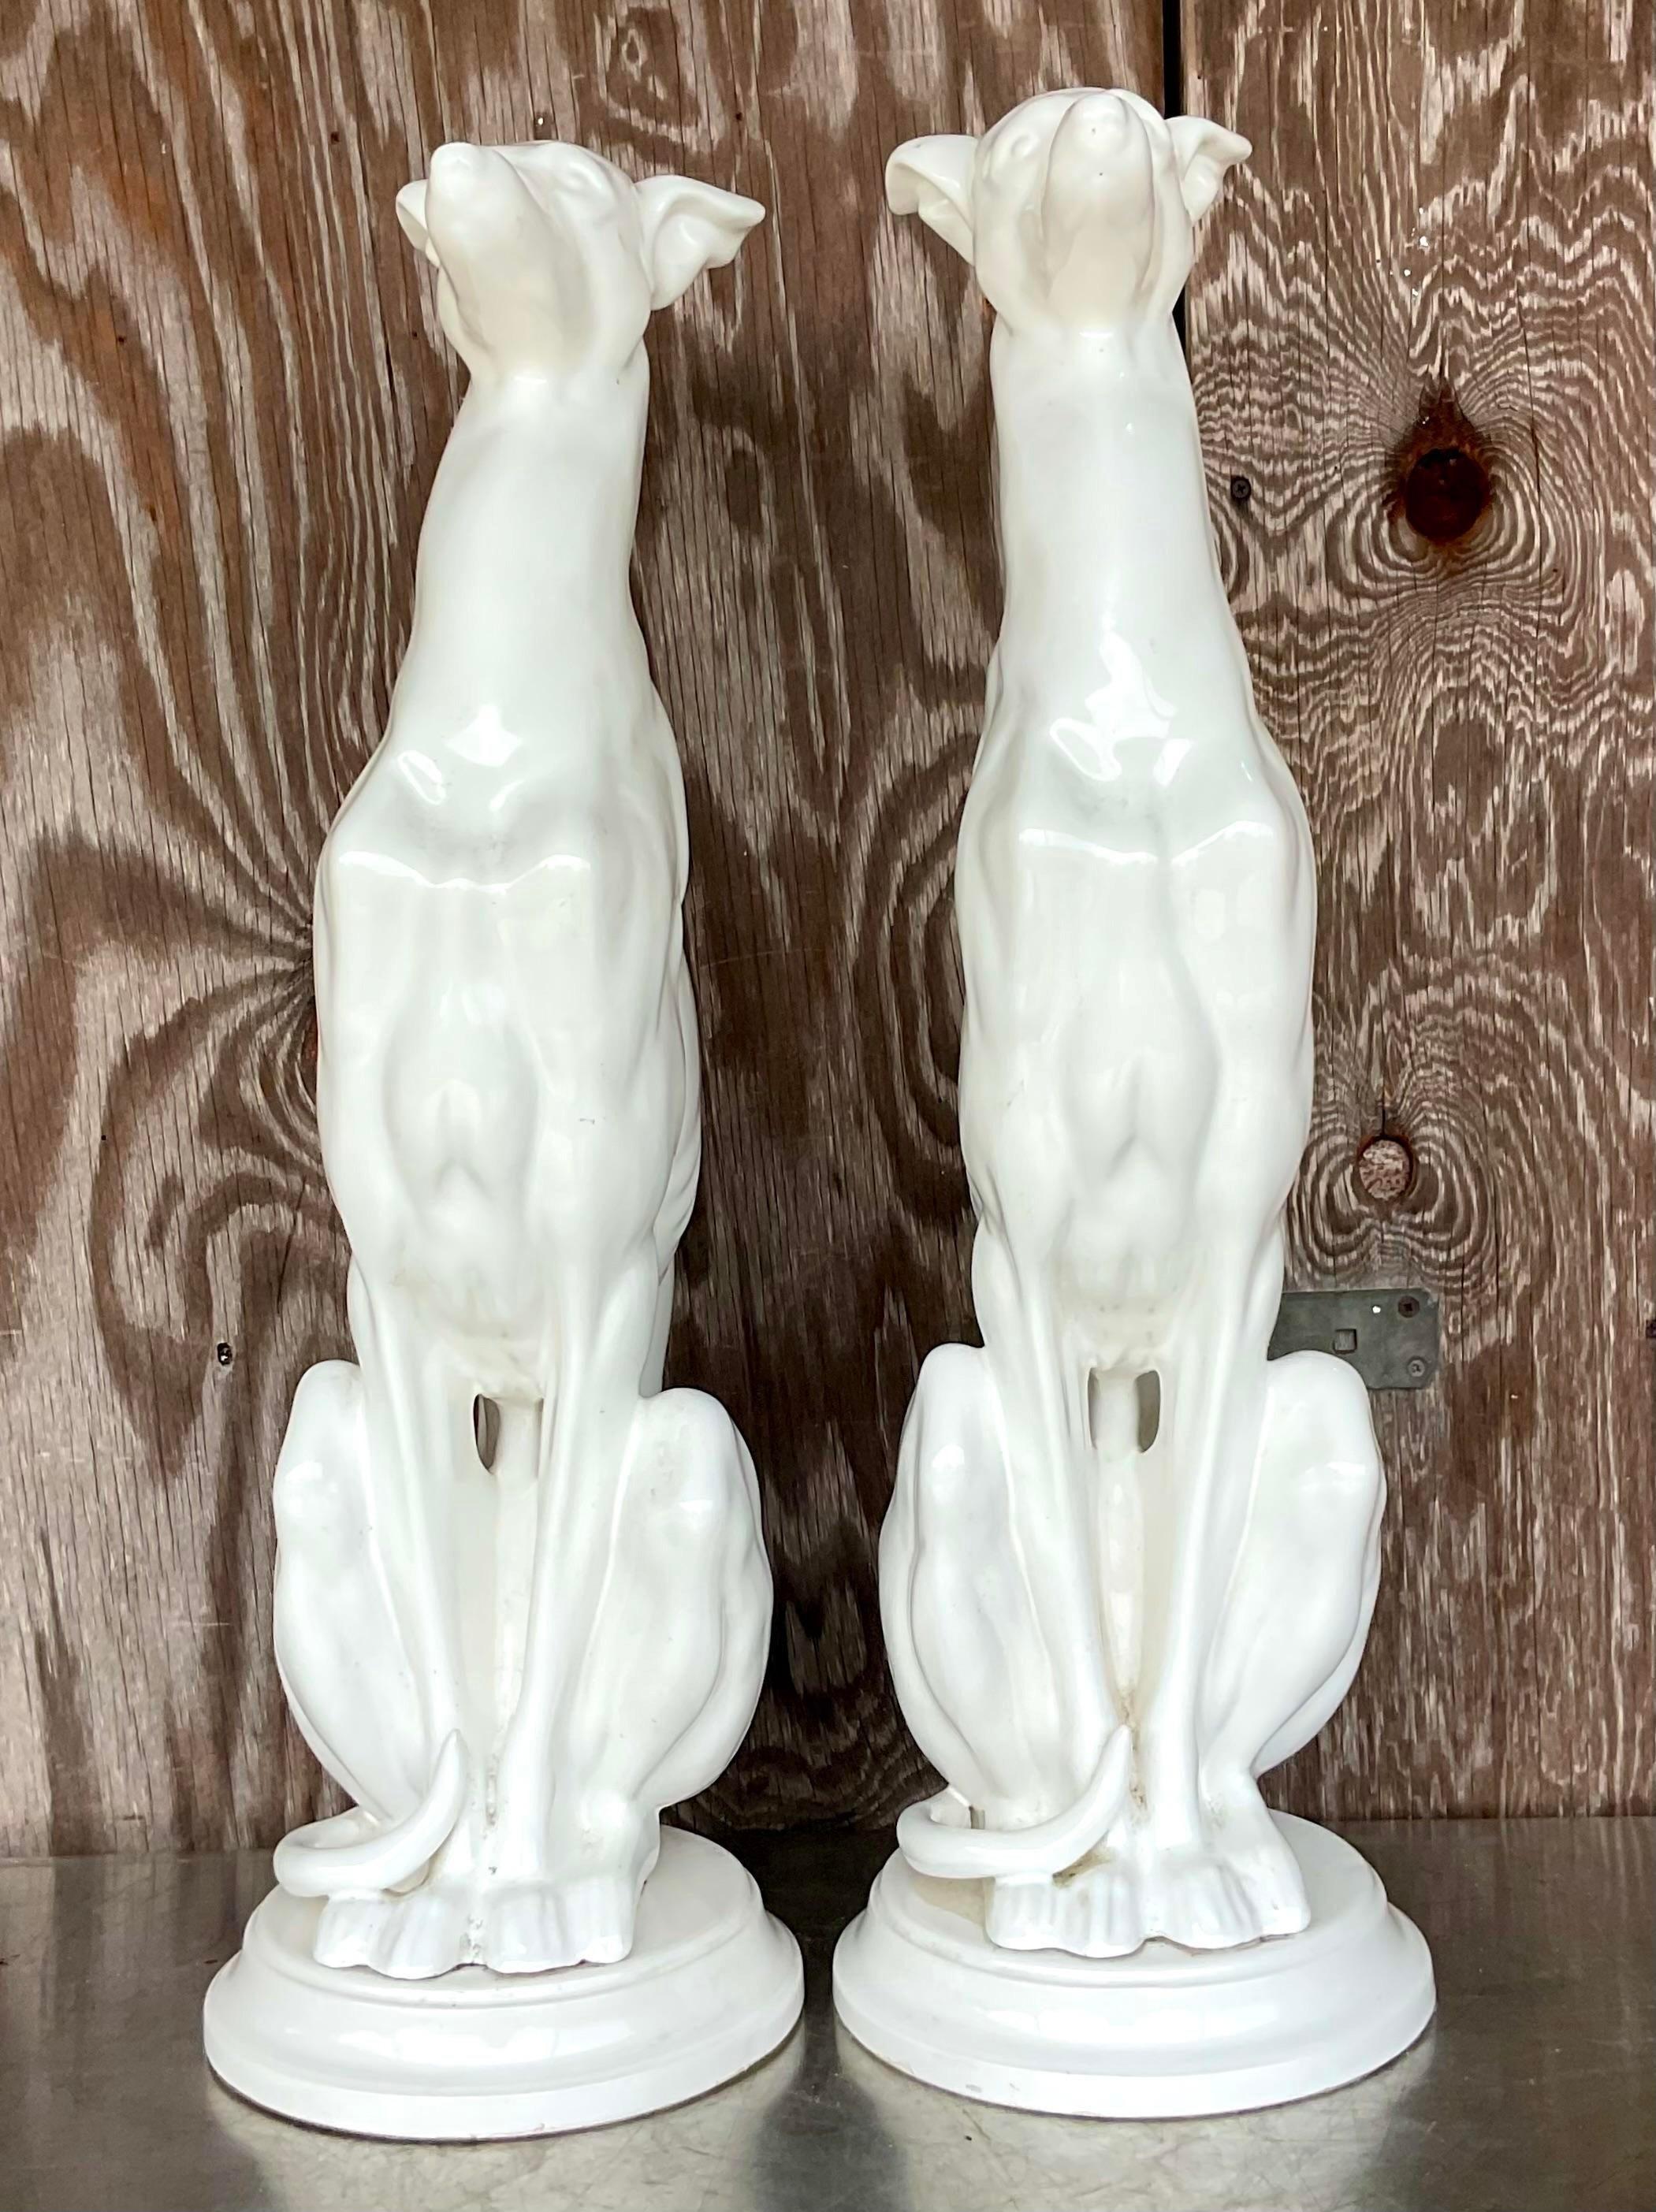 Late 20th Century Vintage Regency Glazed Ceramic Whippets - a Pair For Sale 4